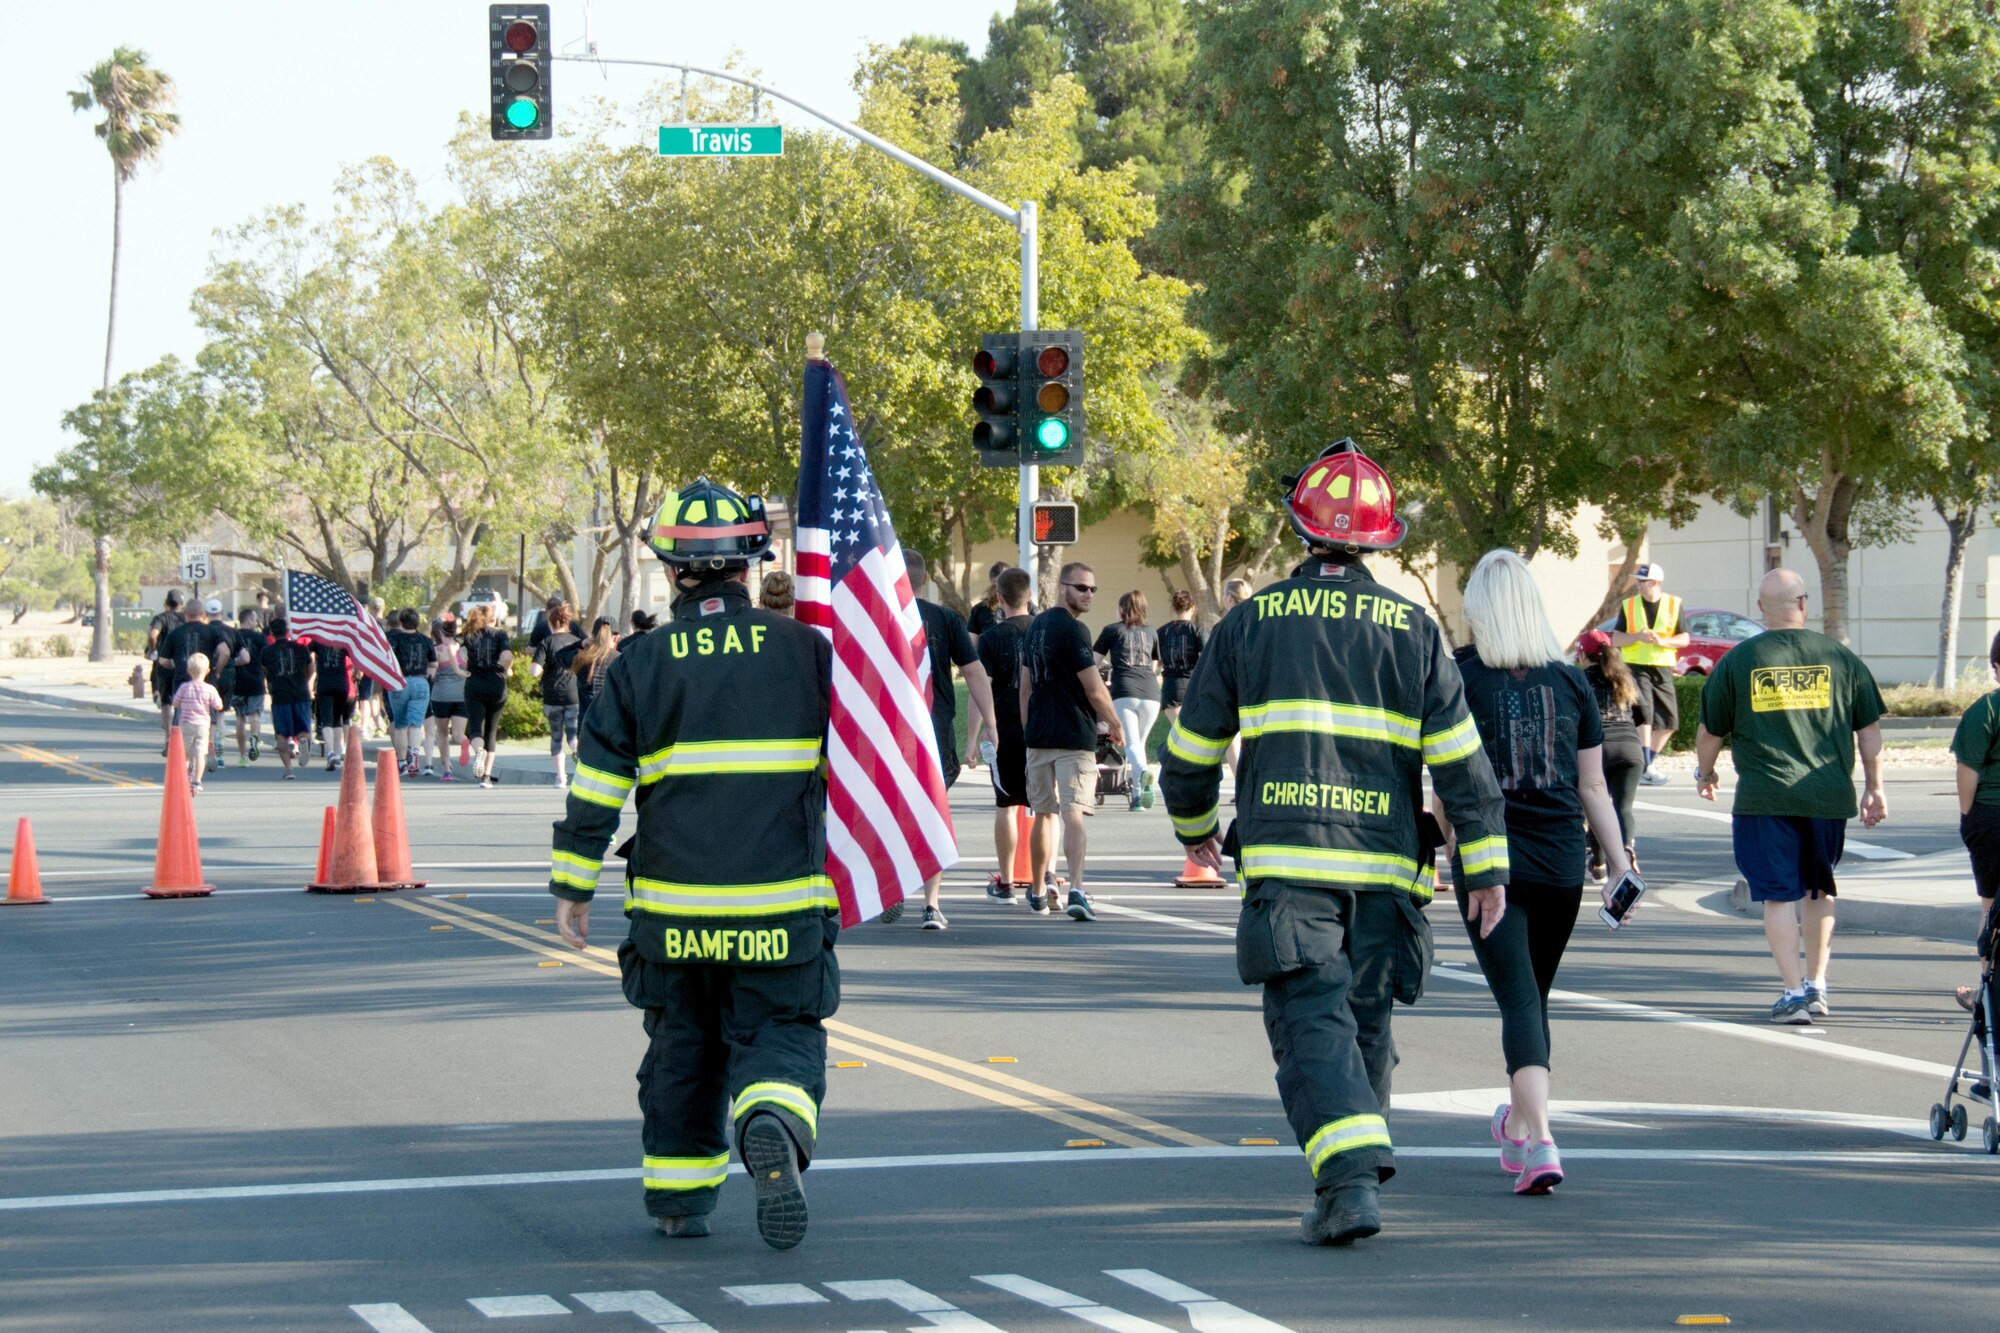 Senior Airman Nicholas Bamford and Nicholas Christensen, both 60th Civil Engineers Squadron firefighters, begin the 3.43 mile Run for the Fallen event on Sept. 10, 2016 at Travis Air Force Base, Calif. The run was held to honor the 343 firefighters who lost their lives on Sept. 11, 2001. (U.S. Air Force photo by Senior Airman Shelby R. Horn/Released)